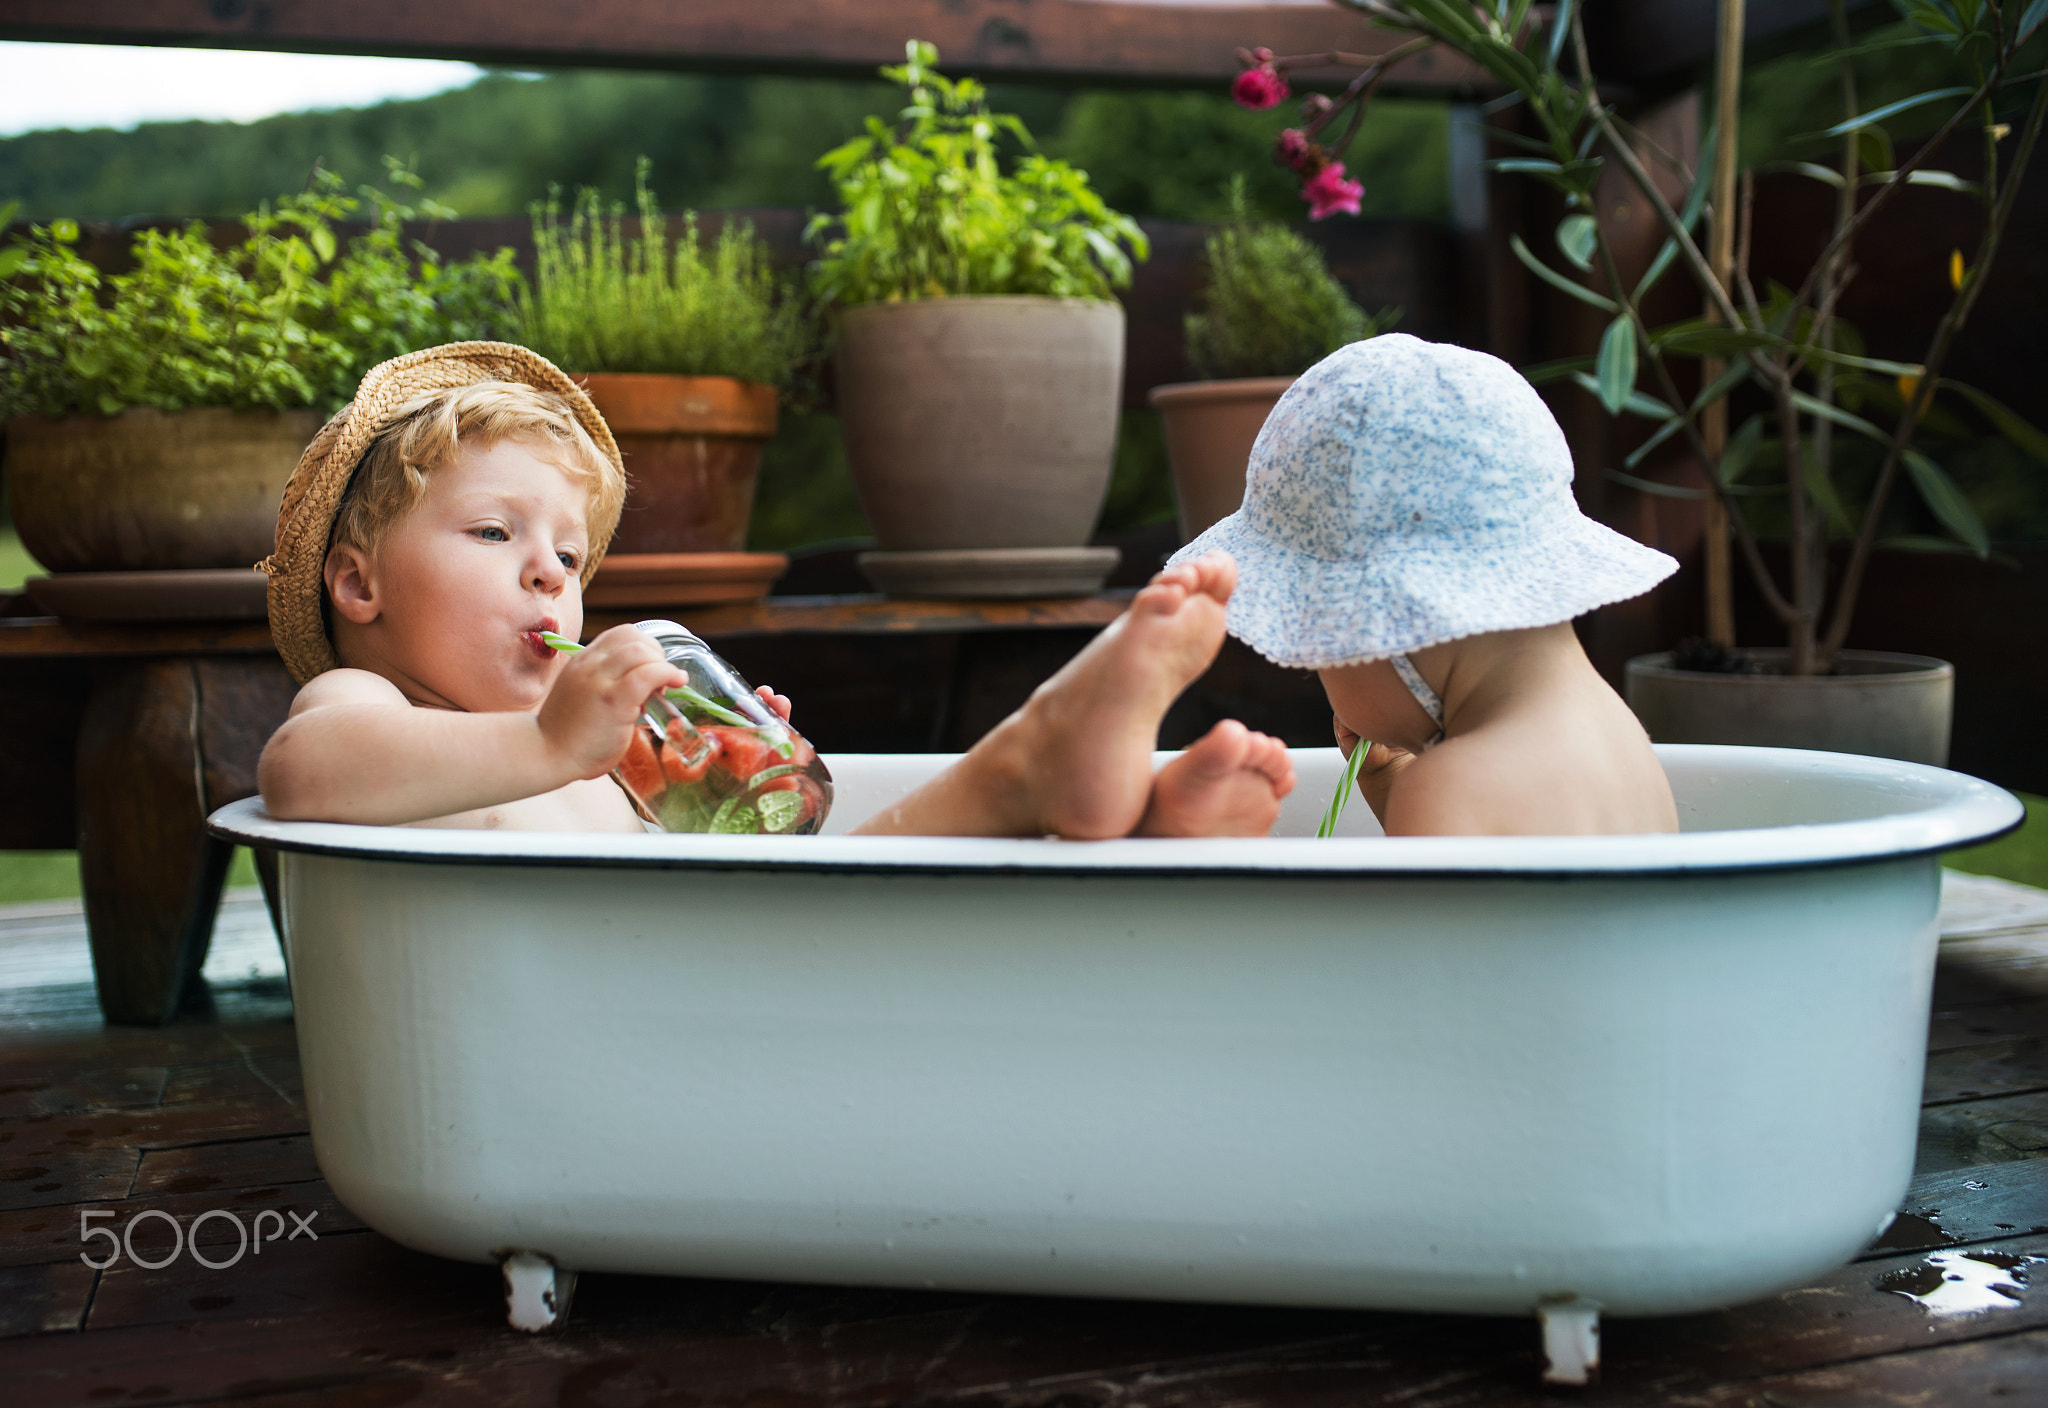 Small children with a drink sitting in bath outdoors in garden in summer.